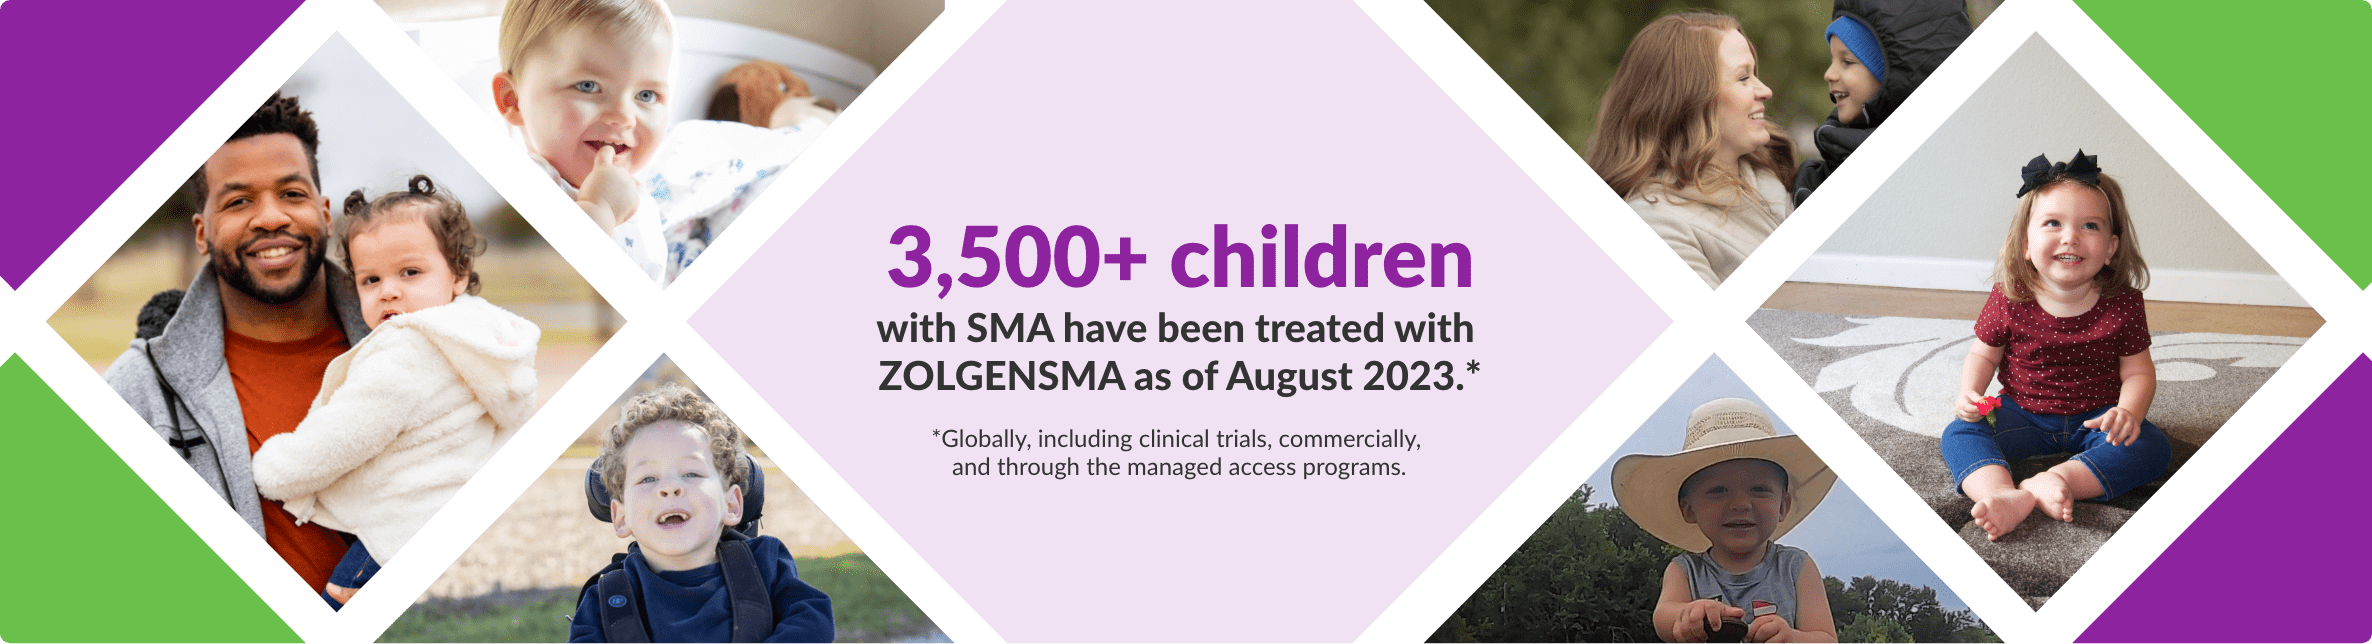 Mosaic of multiple images of smiling children with headline: 3,000+ children with SMA have been treated with ZOLGENSMA as of January 2023*